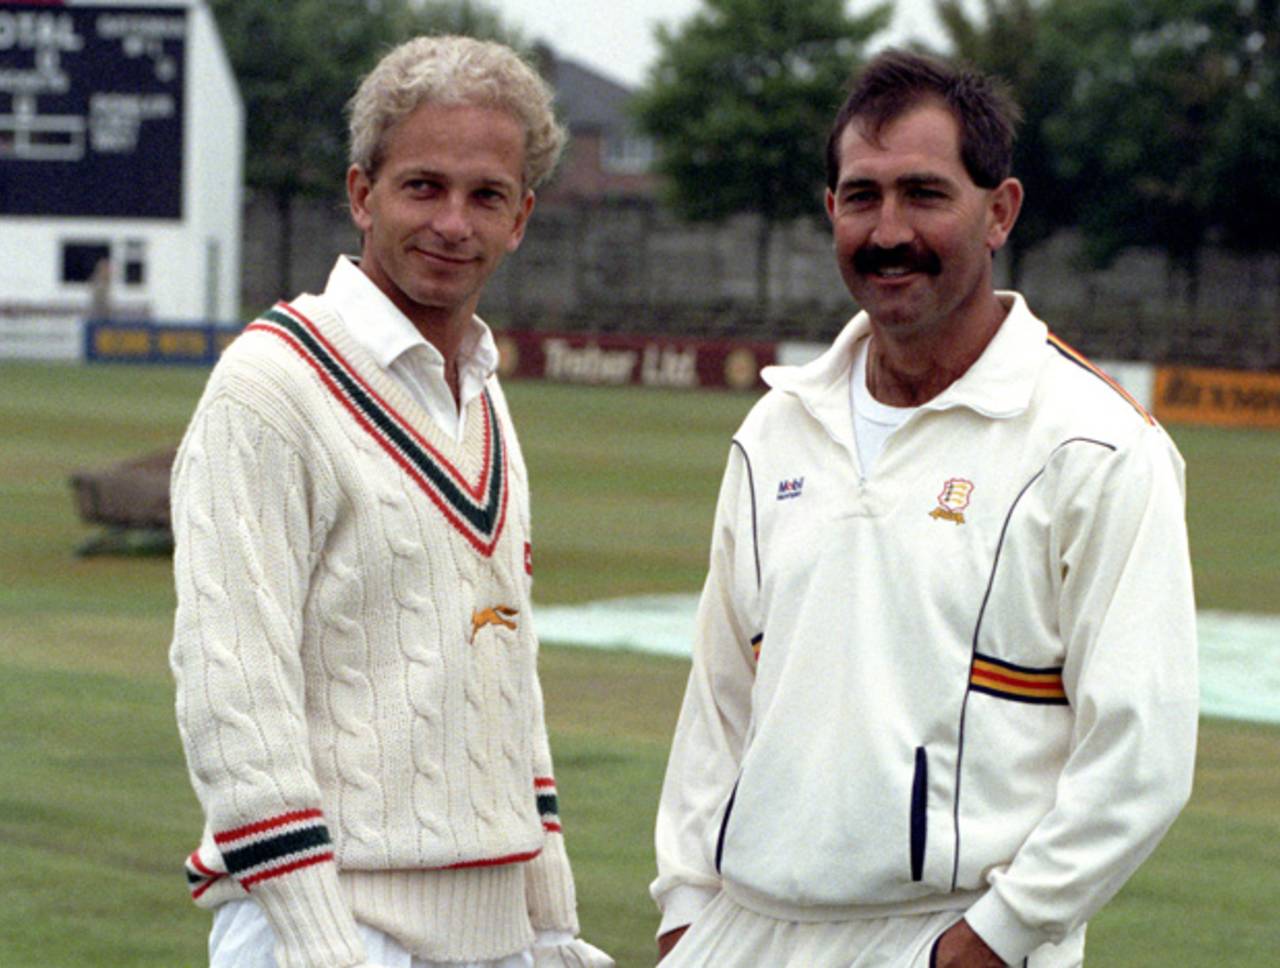 David Gower and Graham Gooch pose for photographs before the start of the county match, Leicestershire v Essex, County Championship, Grace Road, 1st day, September 8, 1989